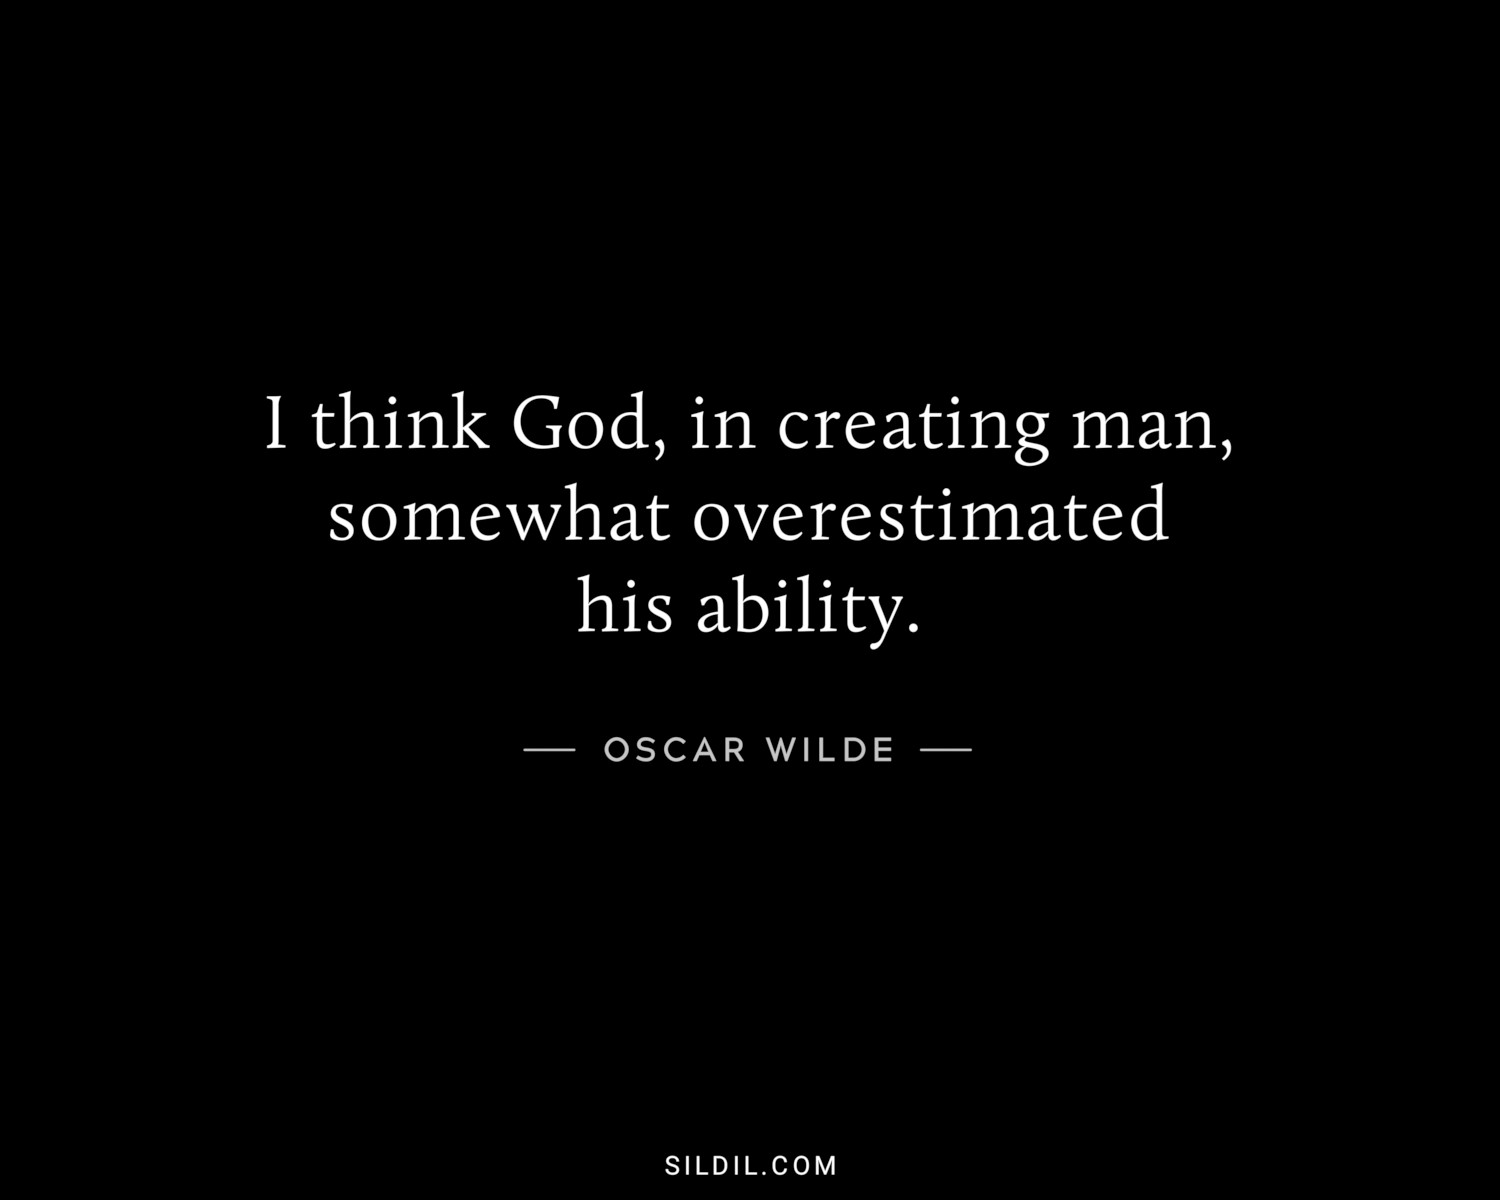 I think God, in creating man, somewhat overestimated his ability.